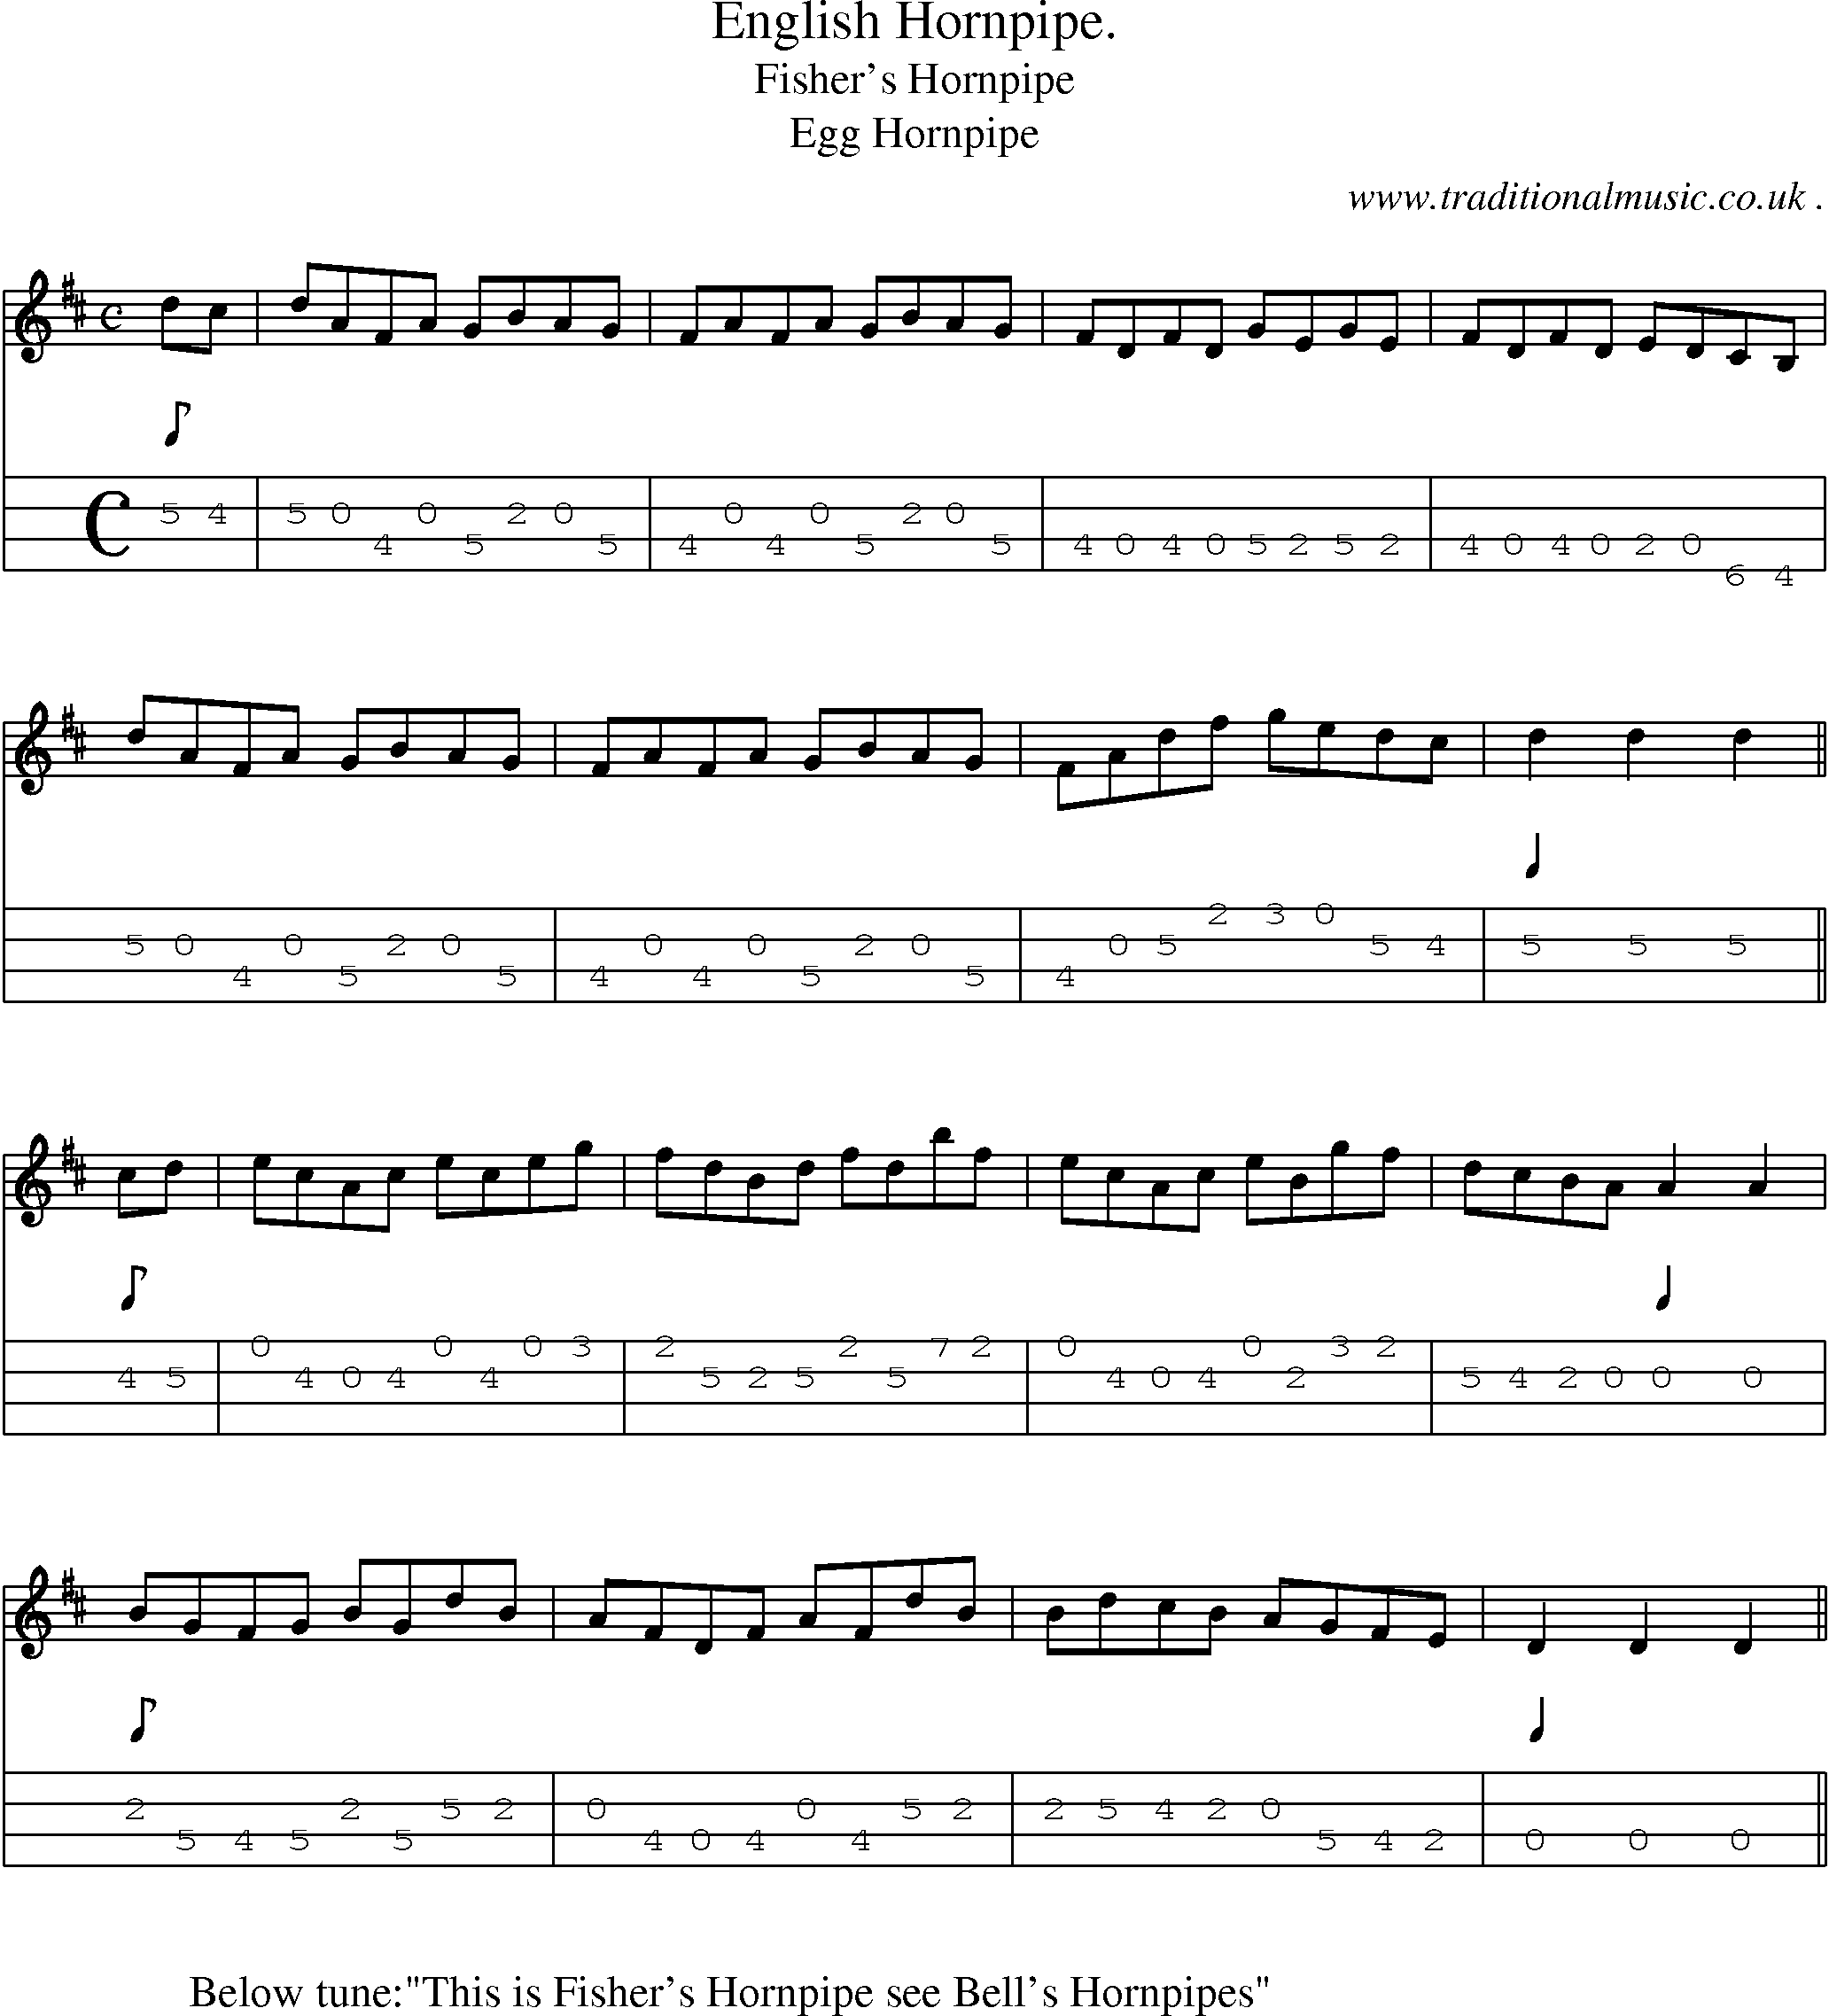 Sheet-Music and Mandolin Tabs for English Hornpipe